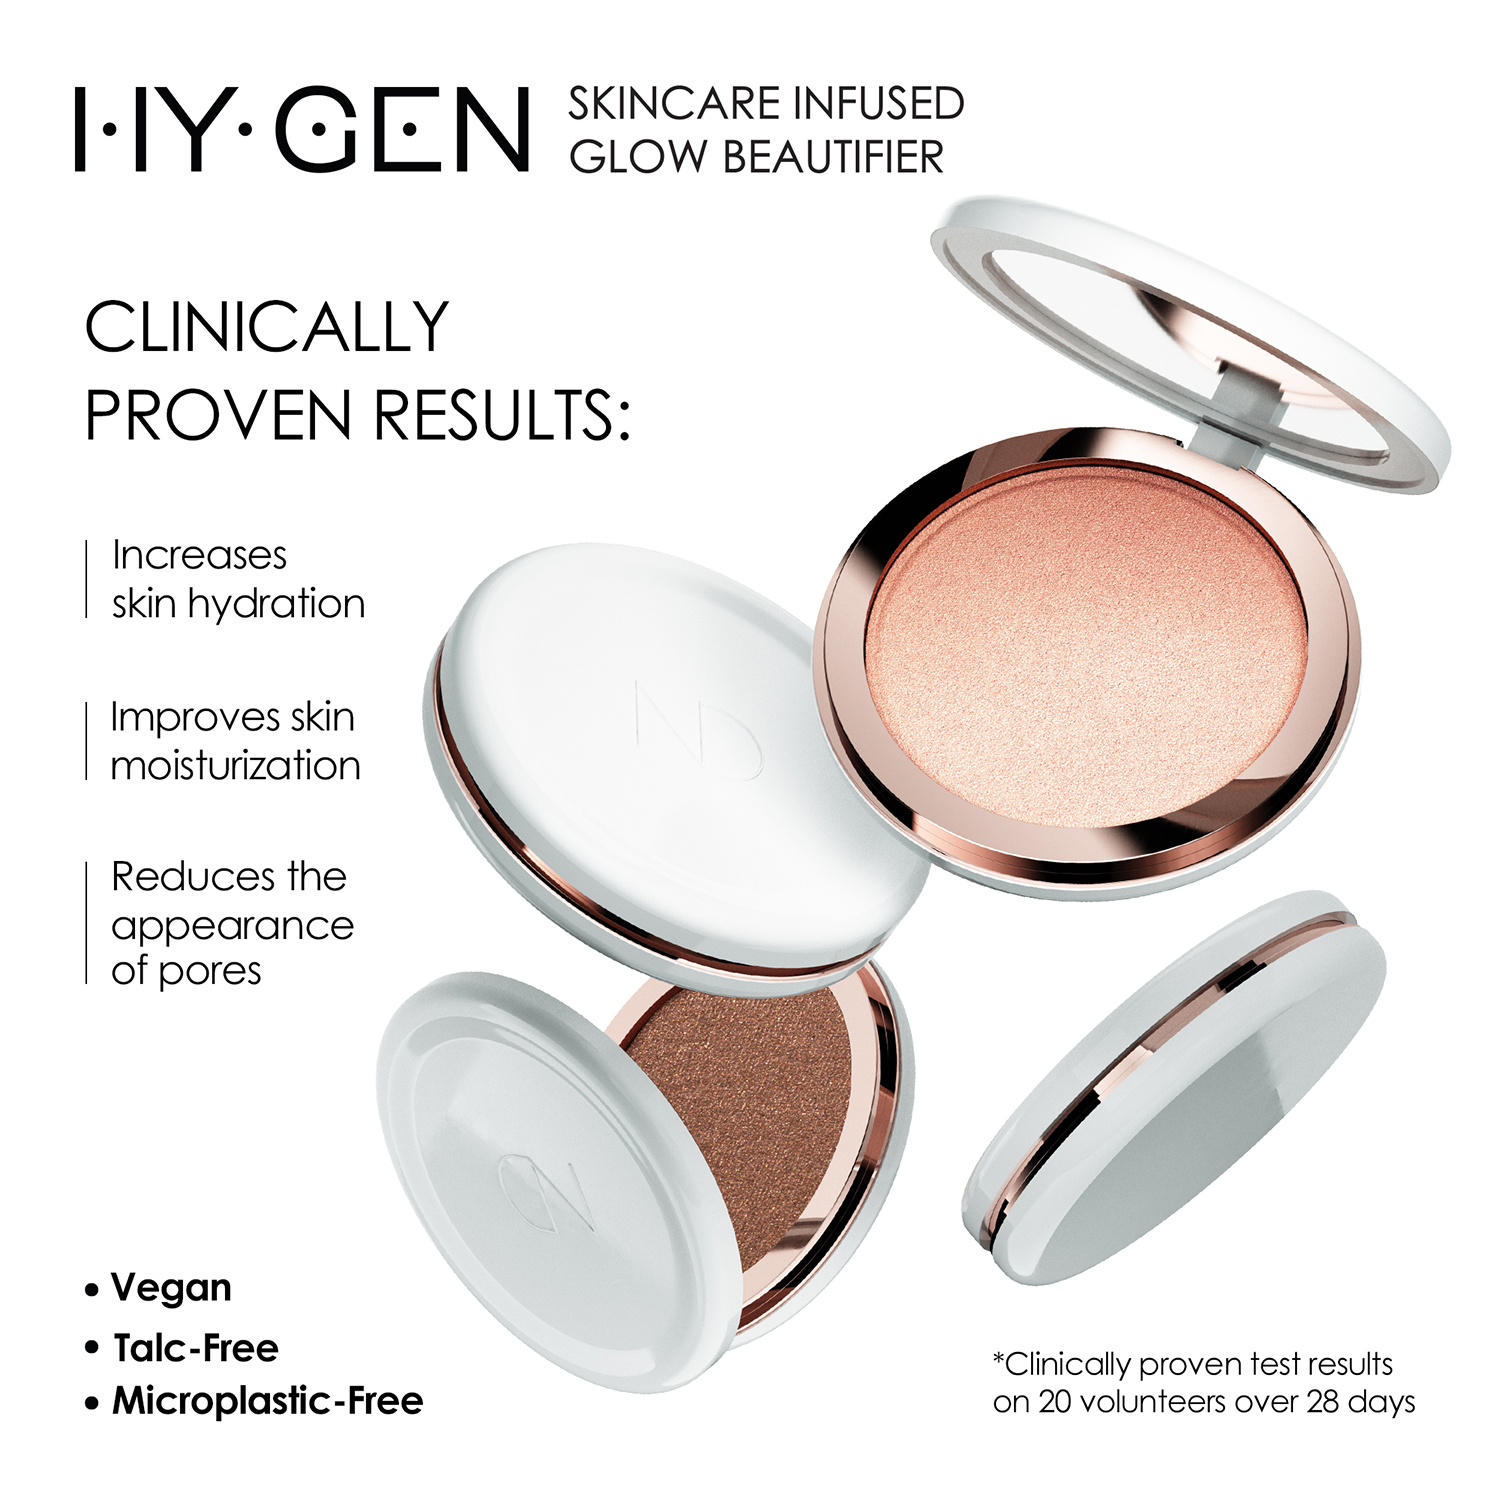 HY-GEN SKINCARE INFUSED GLOW BEAUTIFIER (POLVO PARA ROSTRO)